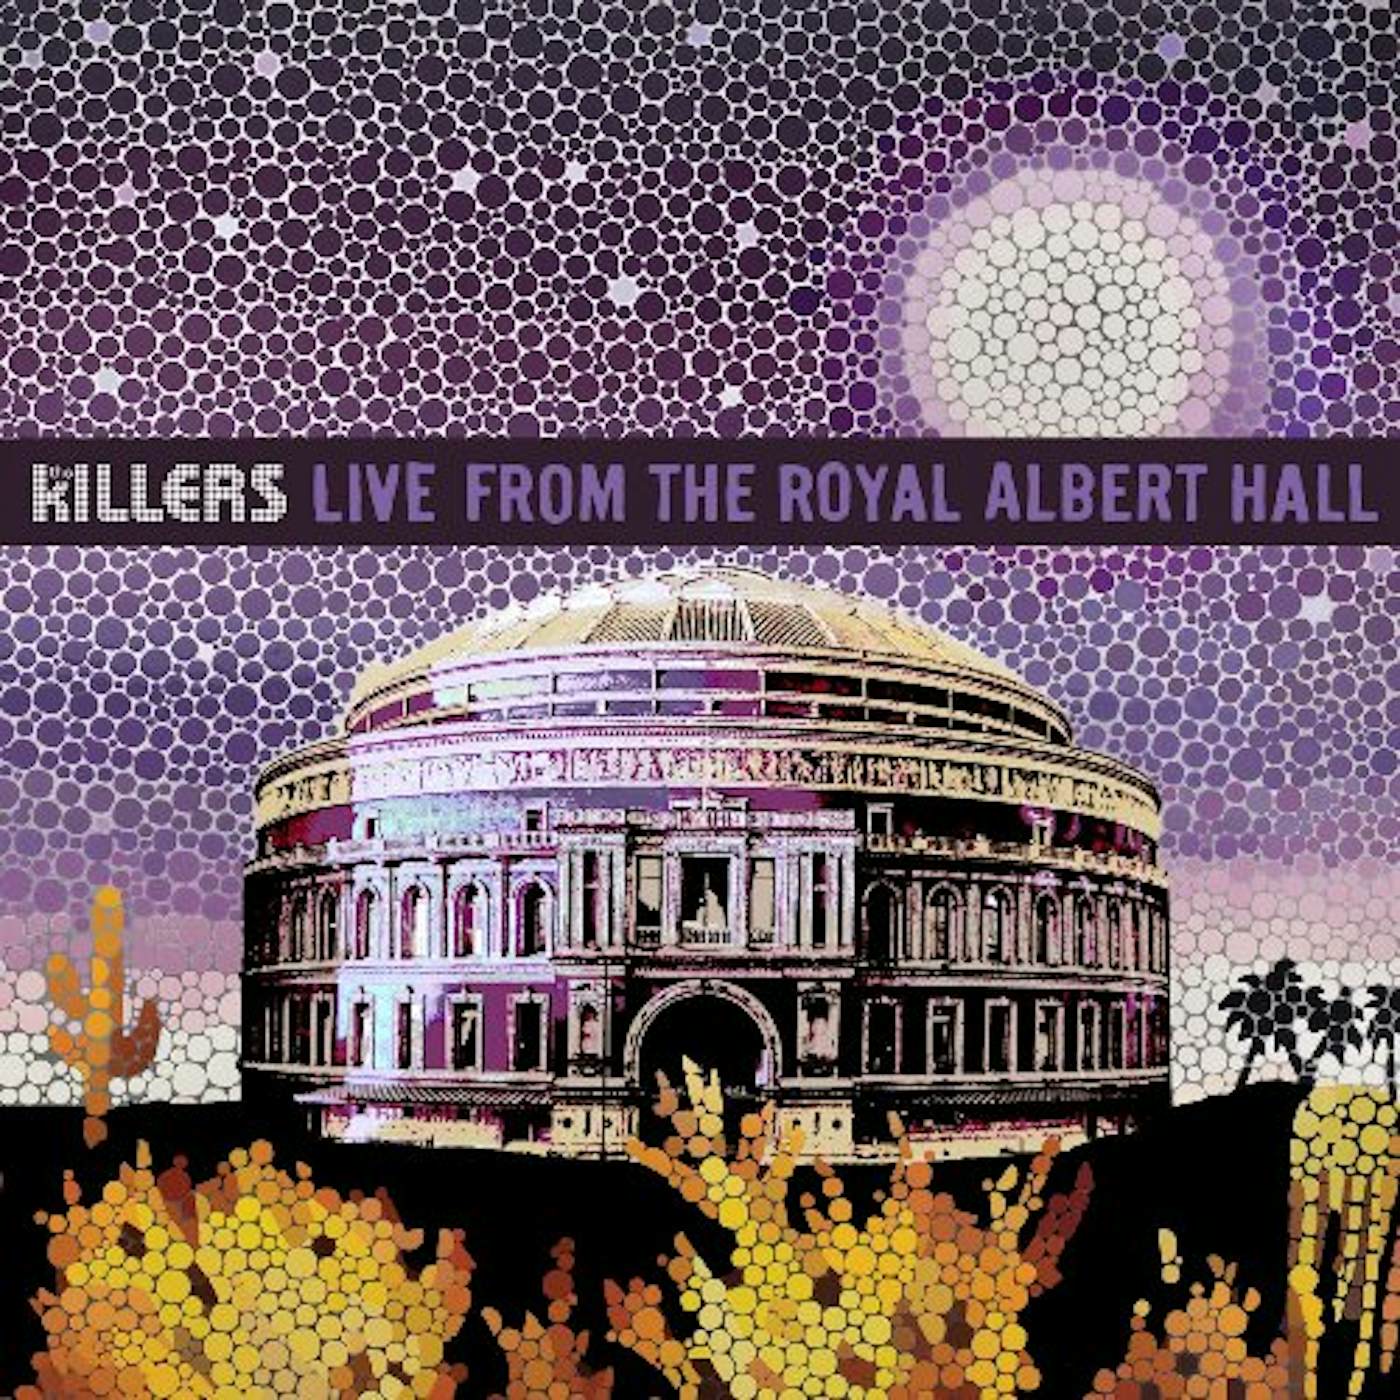 The Killers LIVE FROM ROYAL ALBERT HALL CD